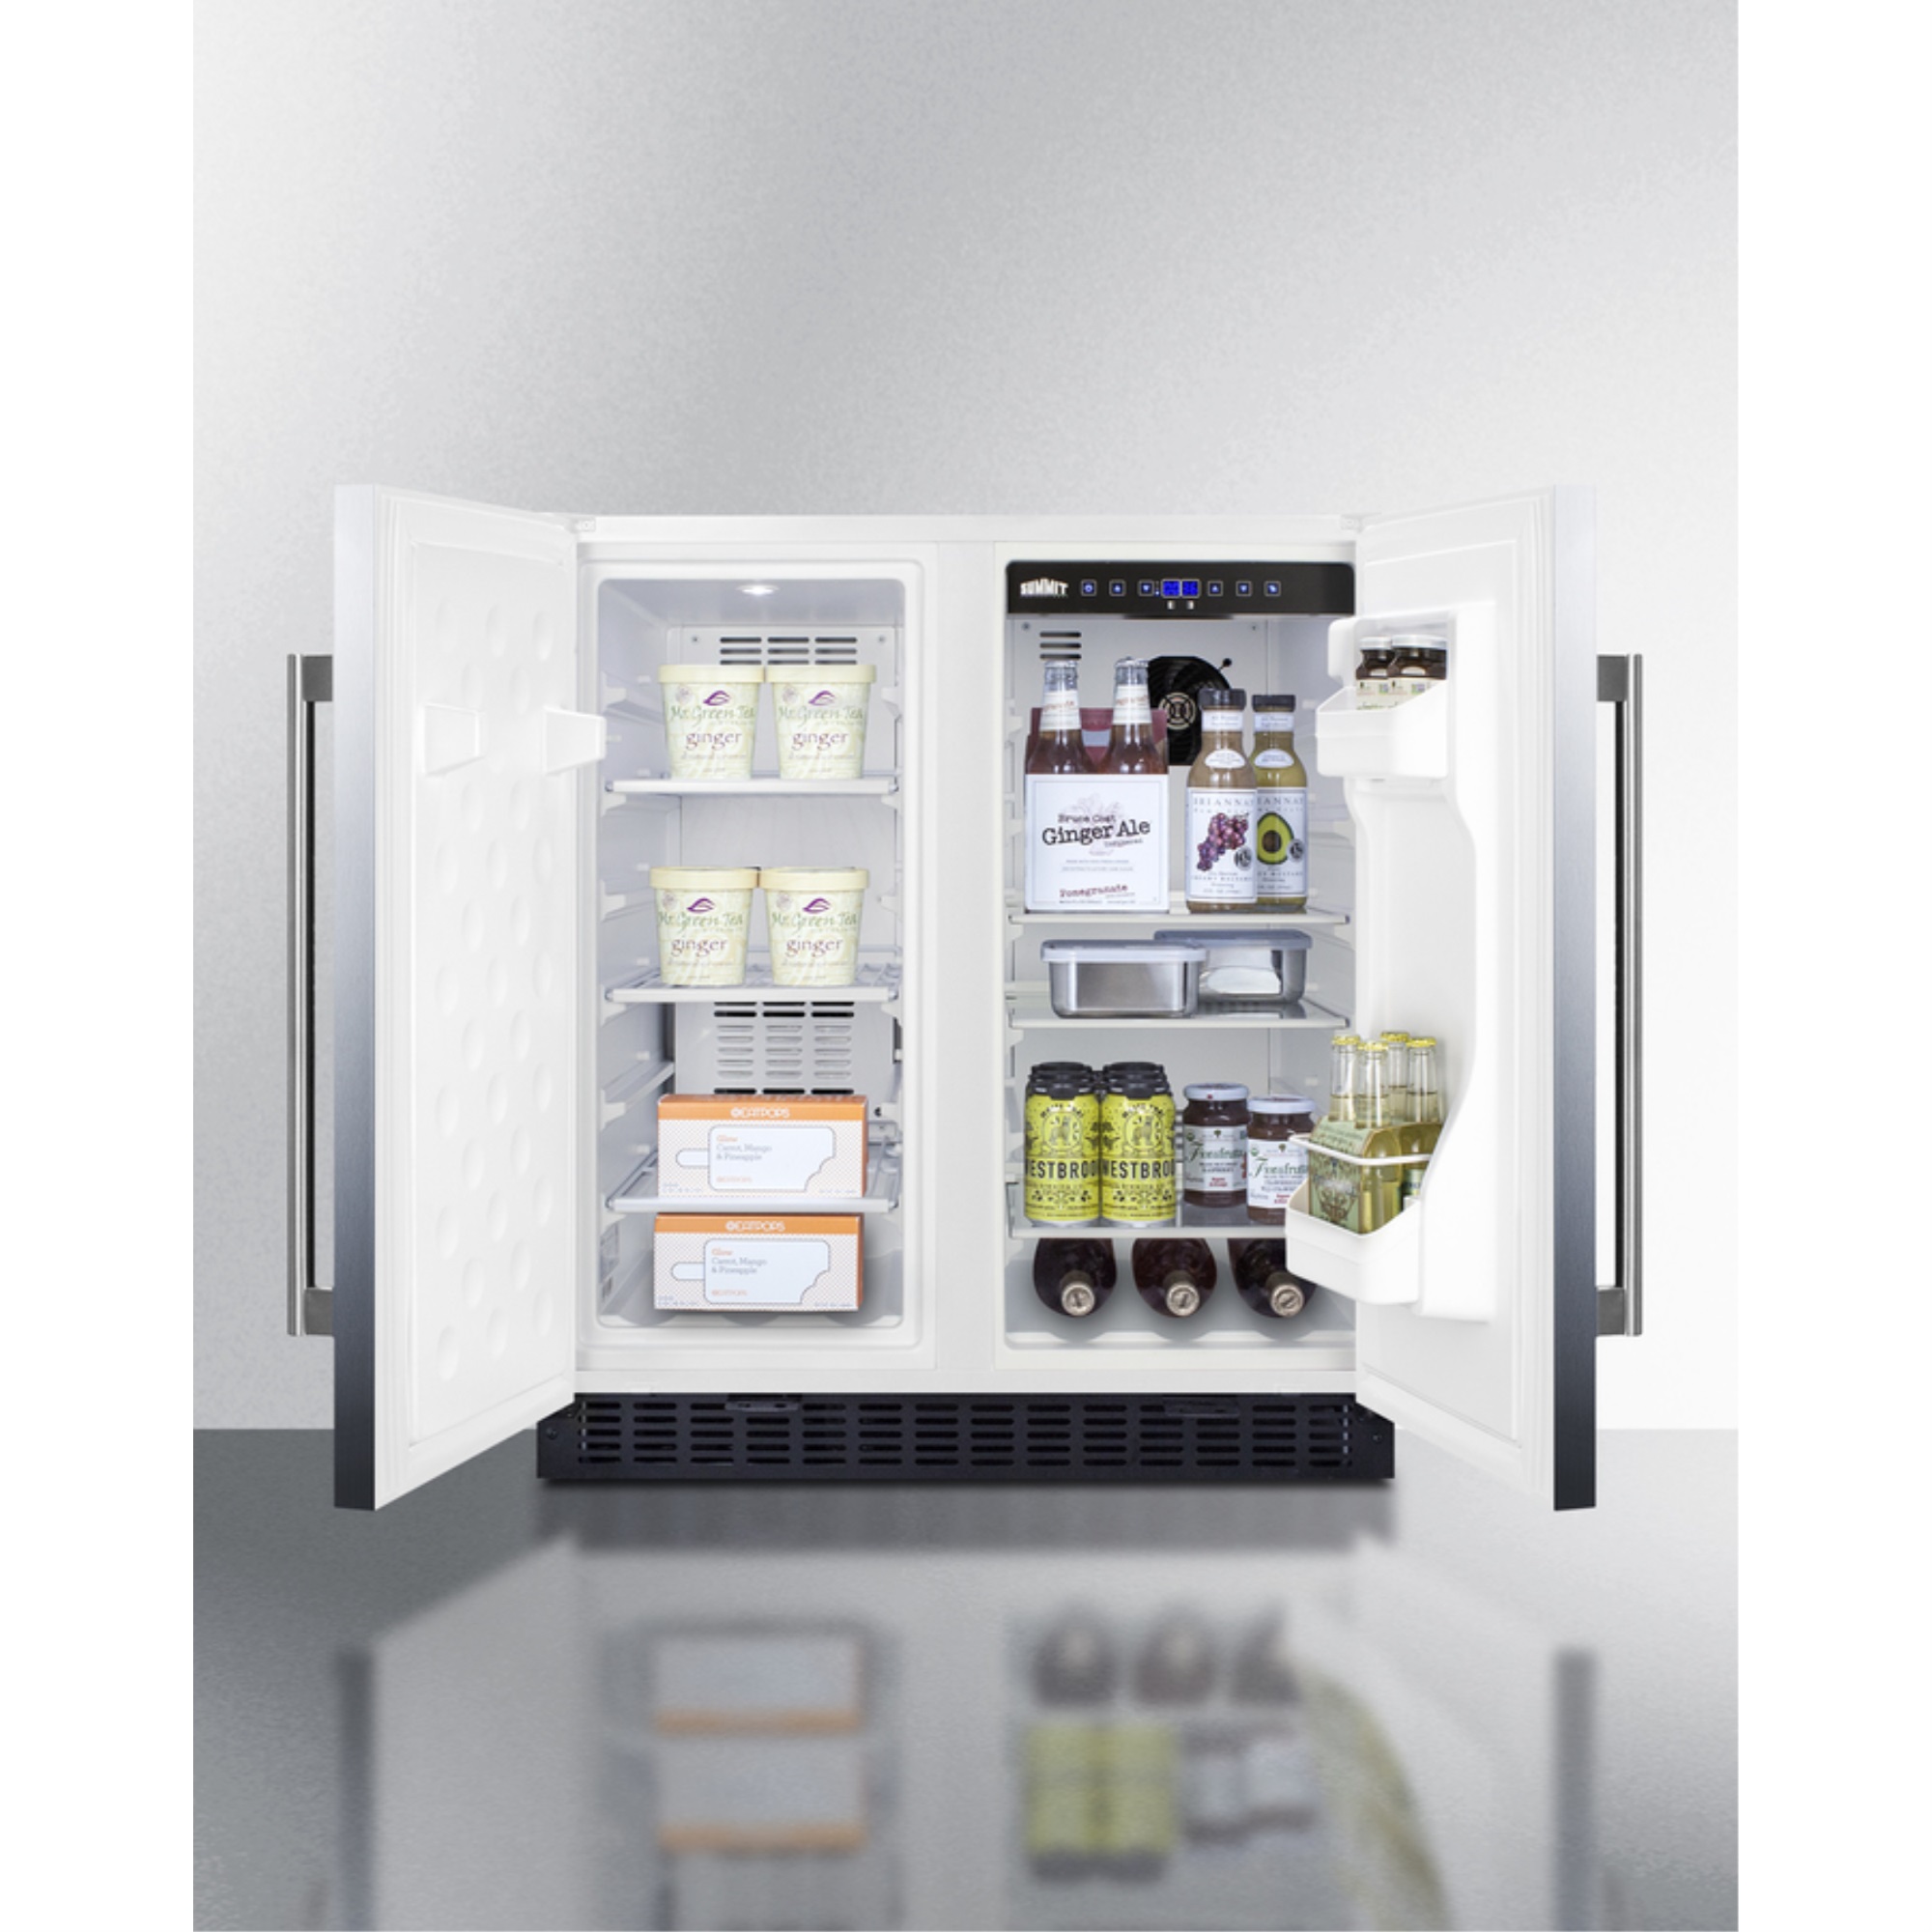 30" wide undercounter frost-free side-by-side refrigerator-freezer with stainless steel doors, white cabinet, locks, stainless steel handles, and digital controls - image 4 of 5